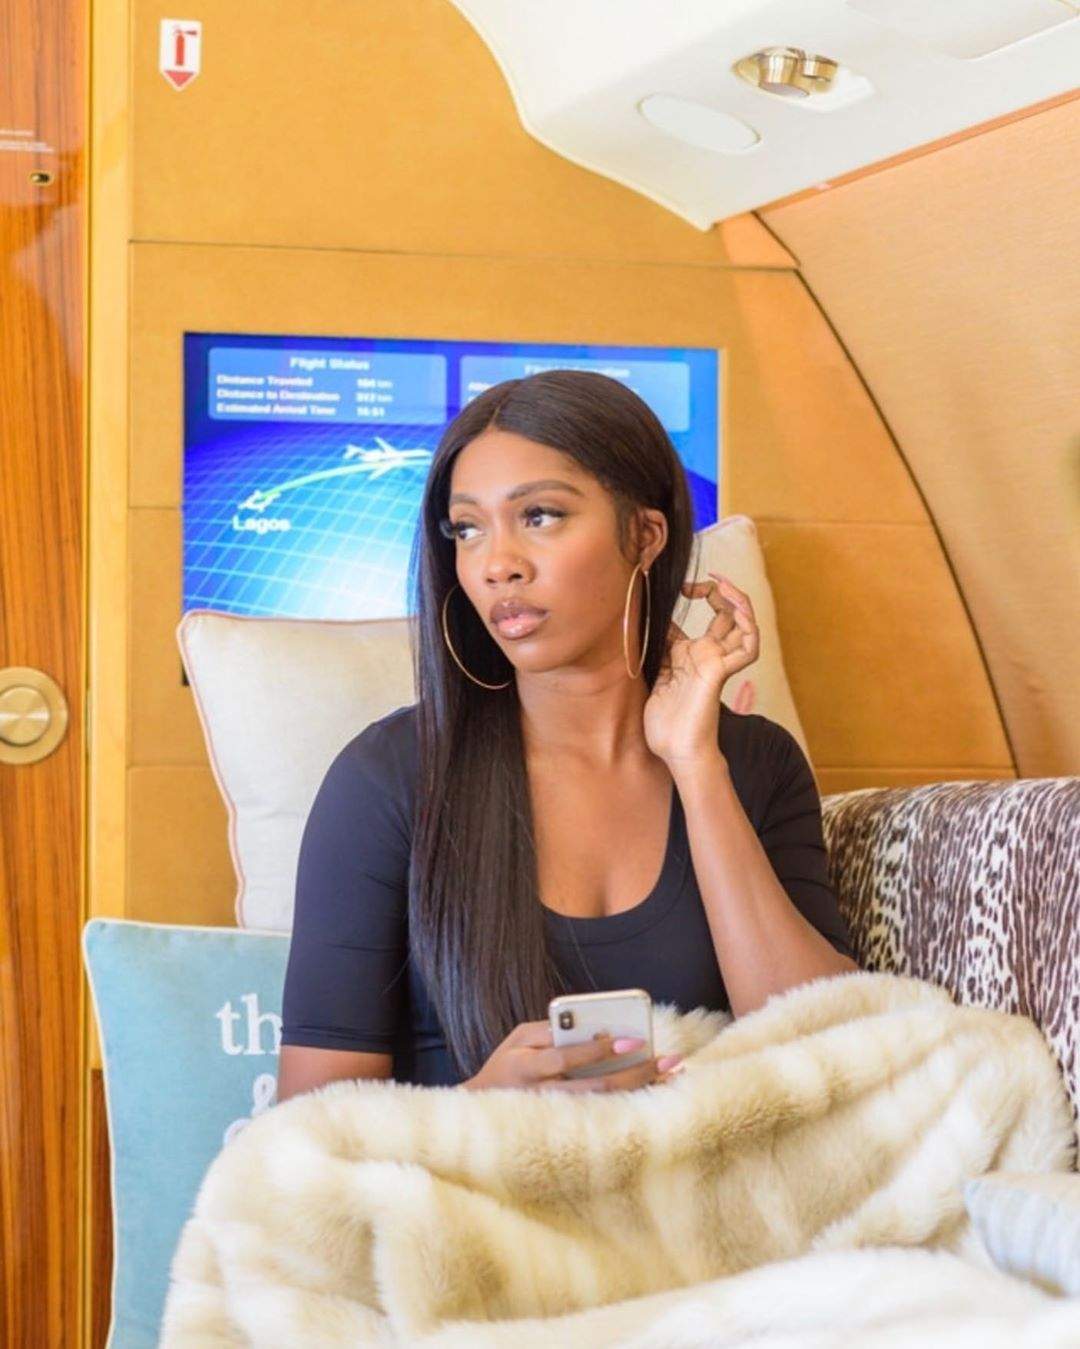 Tiwa Savage cancels her upcoming show in South Africa.. South Africans reply her